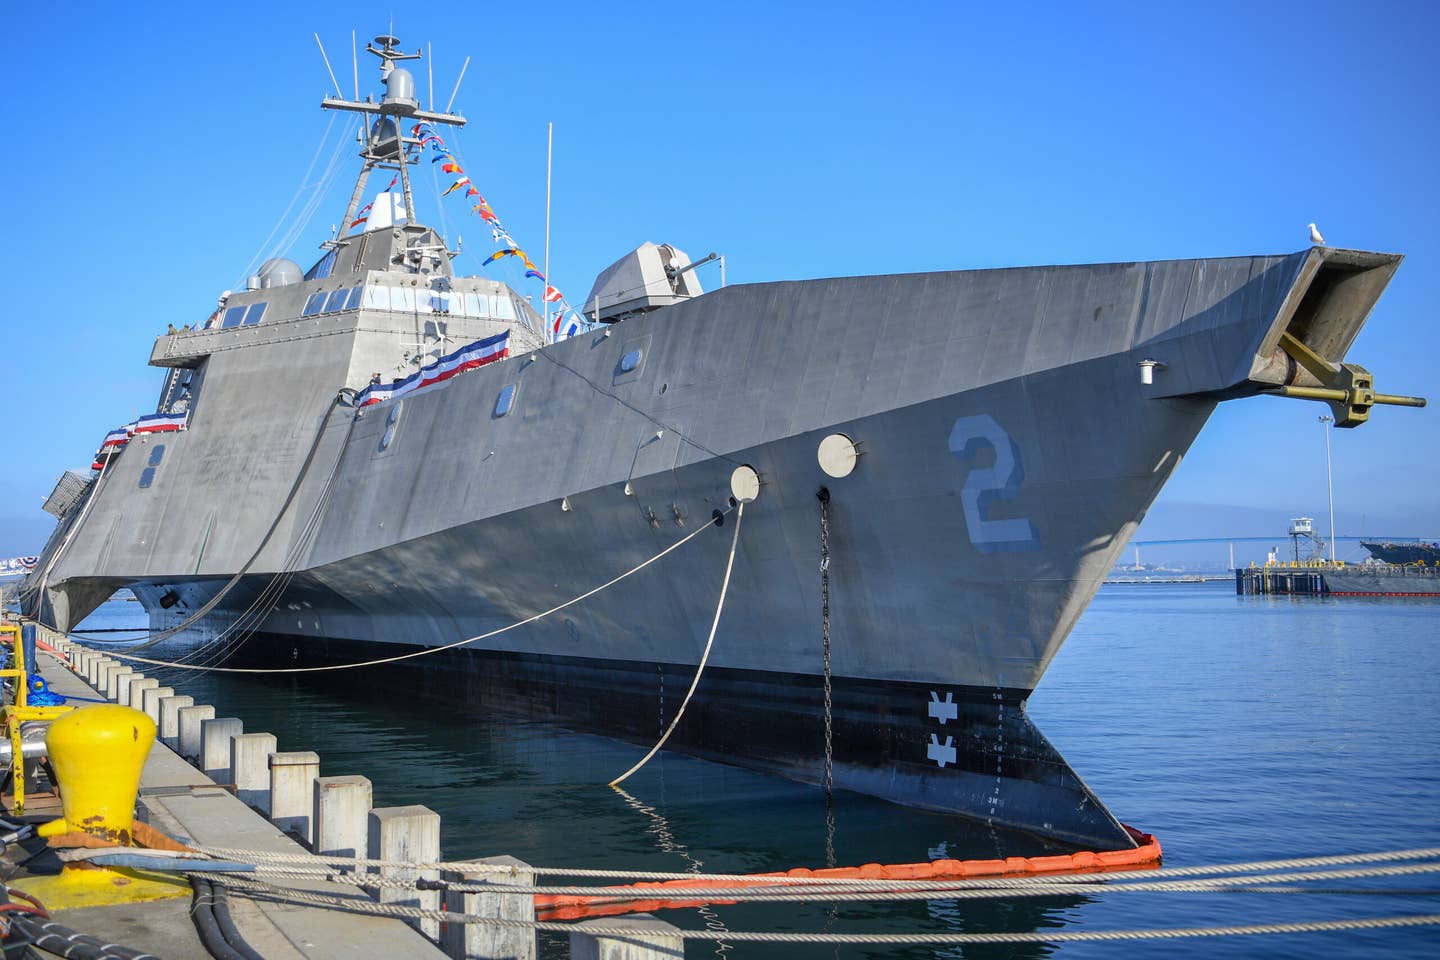 USS <em>Independence</em> (LCS-2) is moored alongside the pier during its decommissioning ceremony at Naval Base San Diego, on July 29, 2021. <em>U.S. Navy photo by Mass Communication Specialist 1st Class Jason Abrams/Released</em>